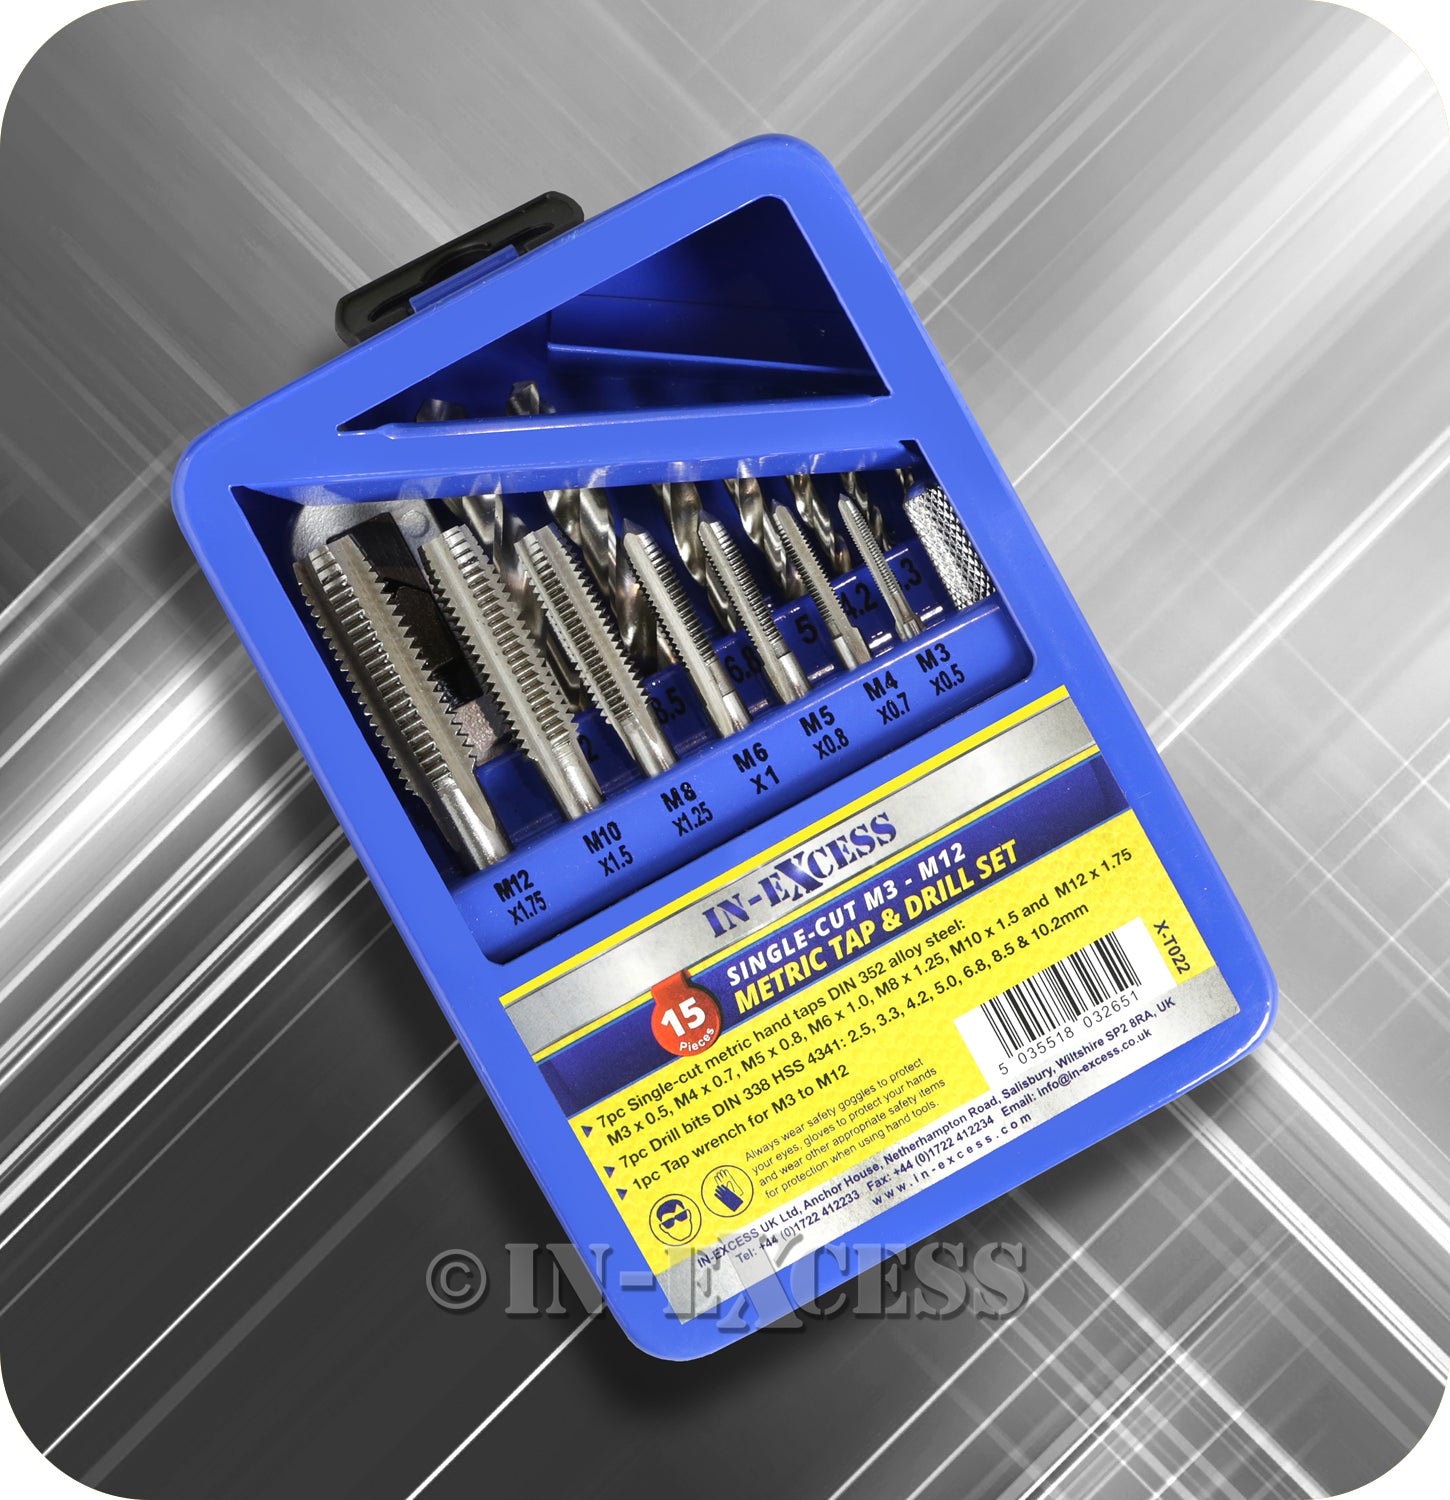 In-Excess Metric M3 - M12 Tap & Power Tool Drill Bit Alloy Steel Set - Set of 15 Pieces